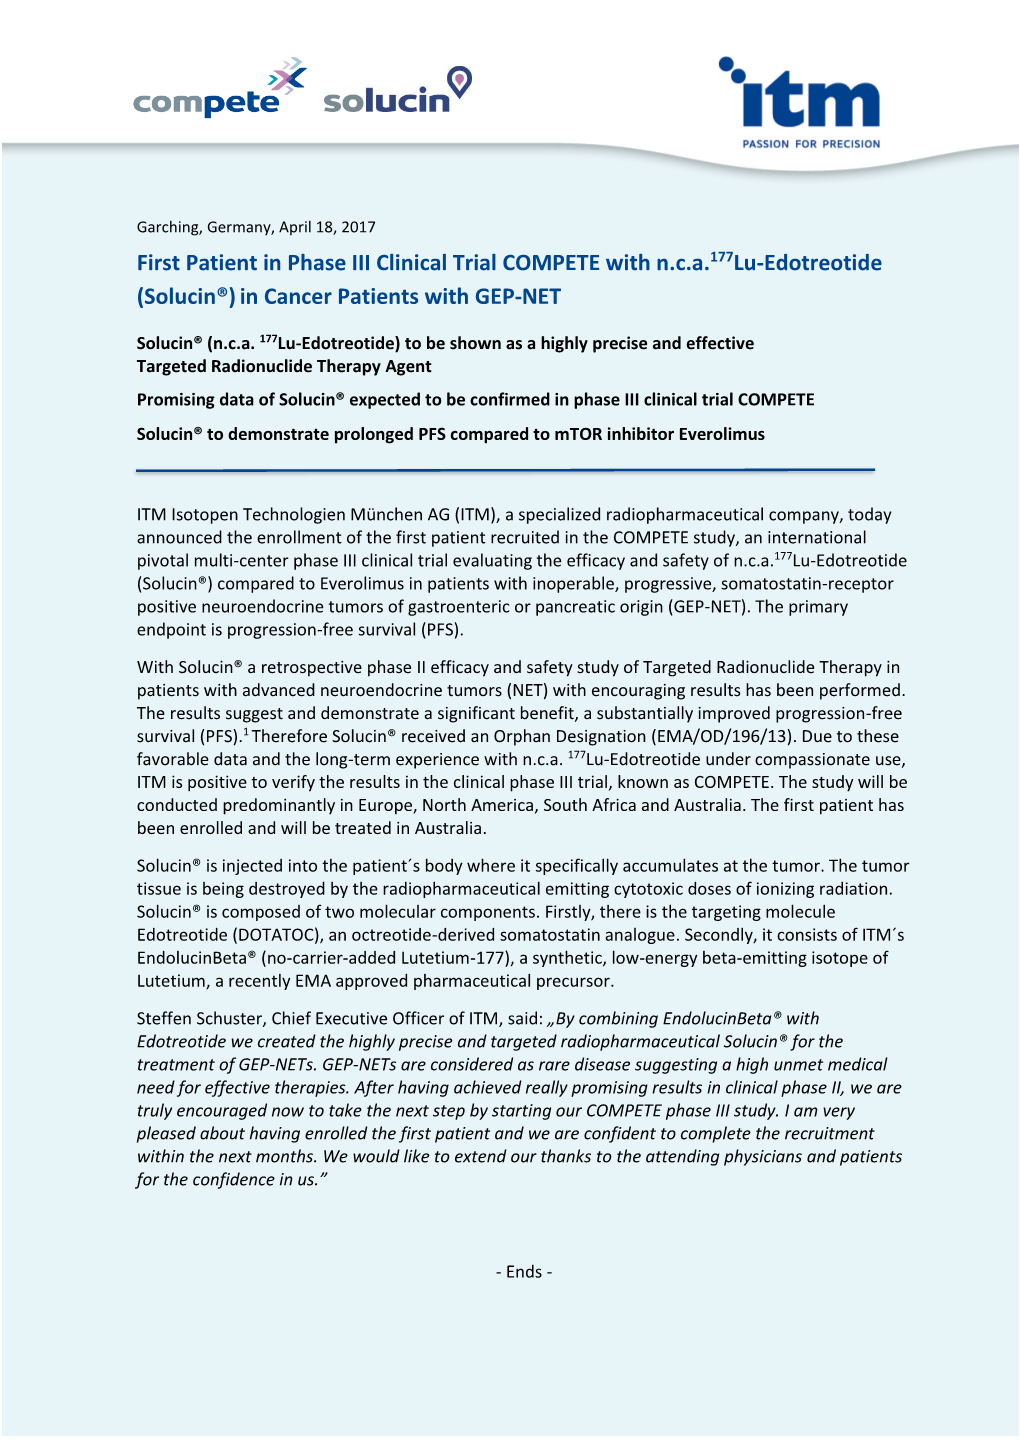 First Patient in Phase III Clinical Trial COMPETE with N.C.A.177Lu-Edotreotide (Solucin®) in Cancer Patients with GEP-NET